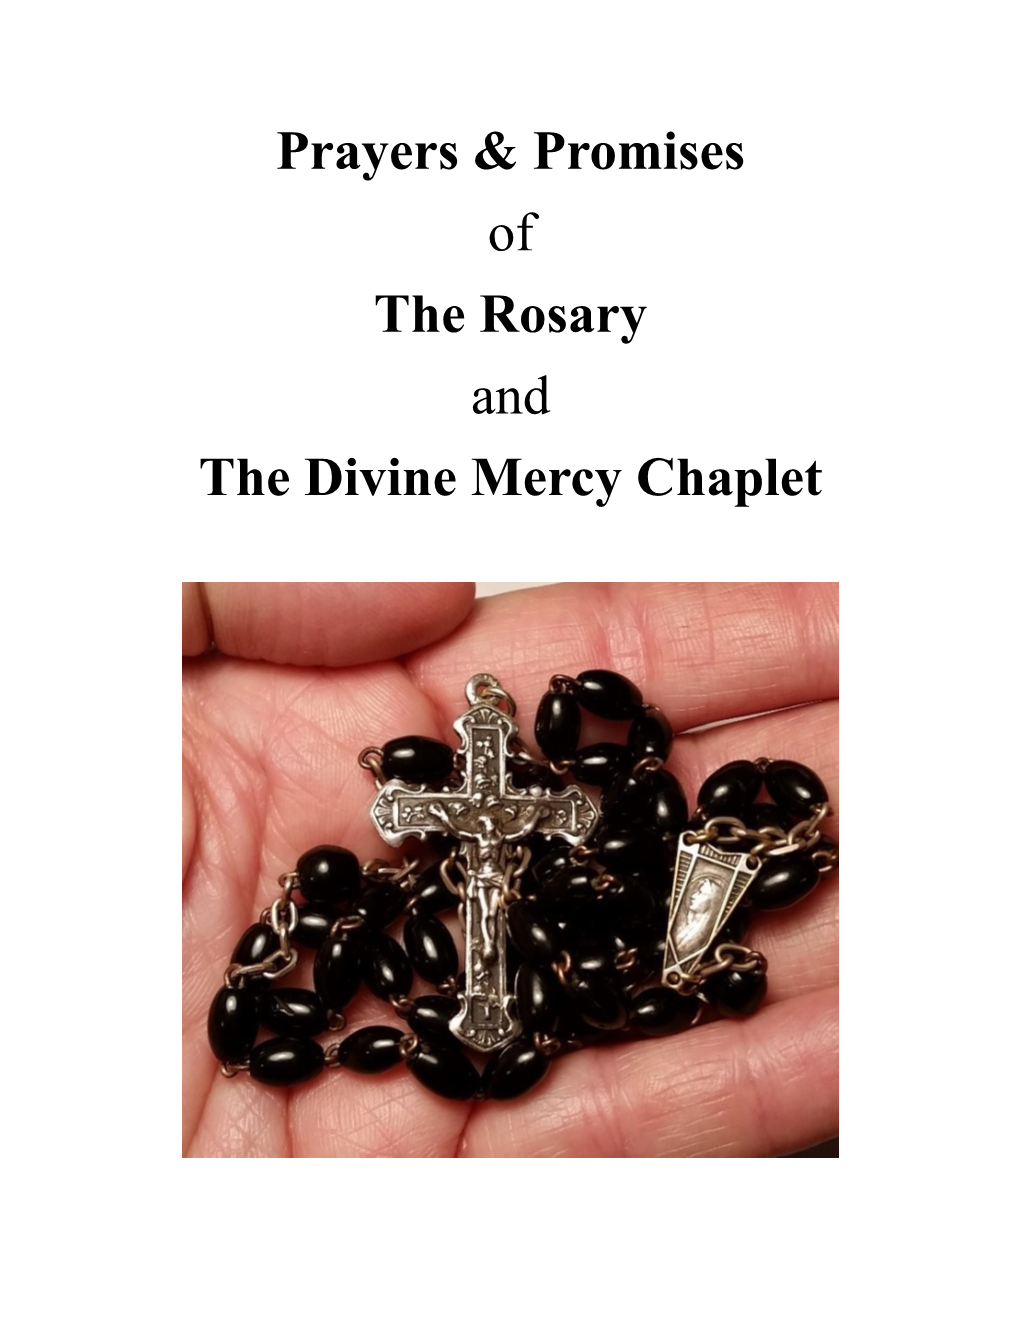 Prayers & Promises of the Rosary and the Divine Mercy Chaplet